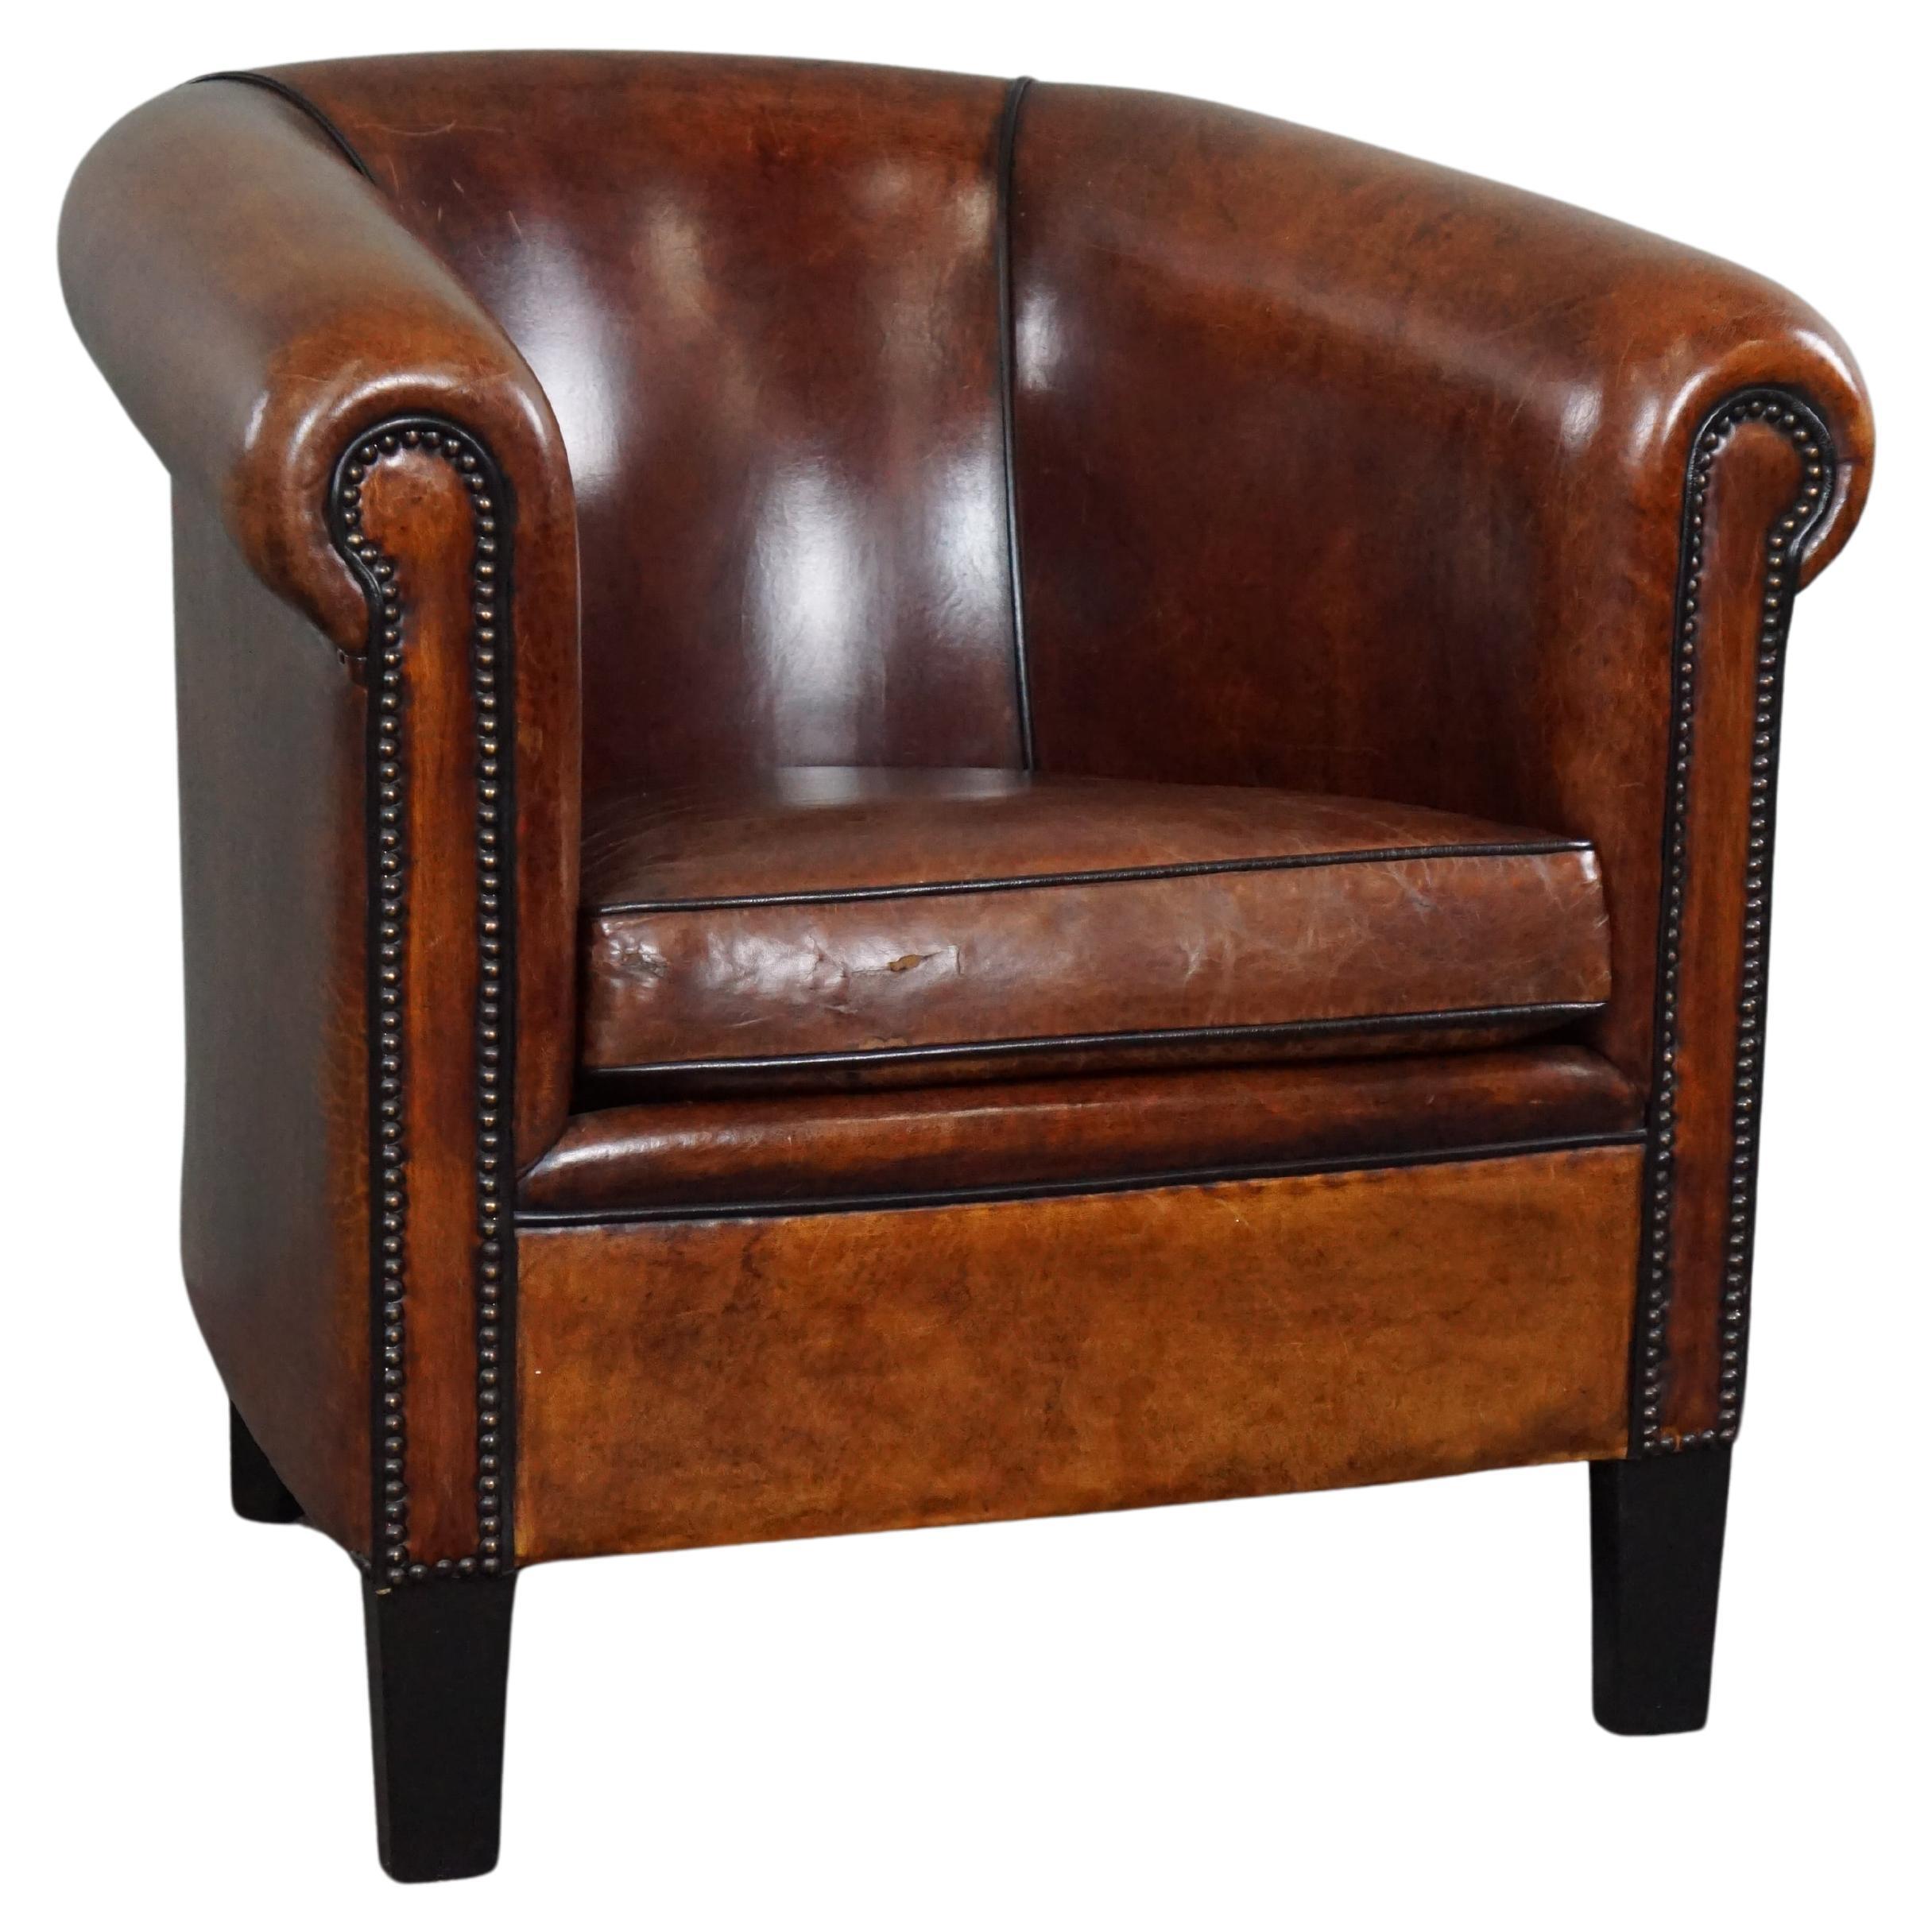 Sheep leather club chair with black piping and decorative nails For Sale